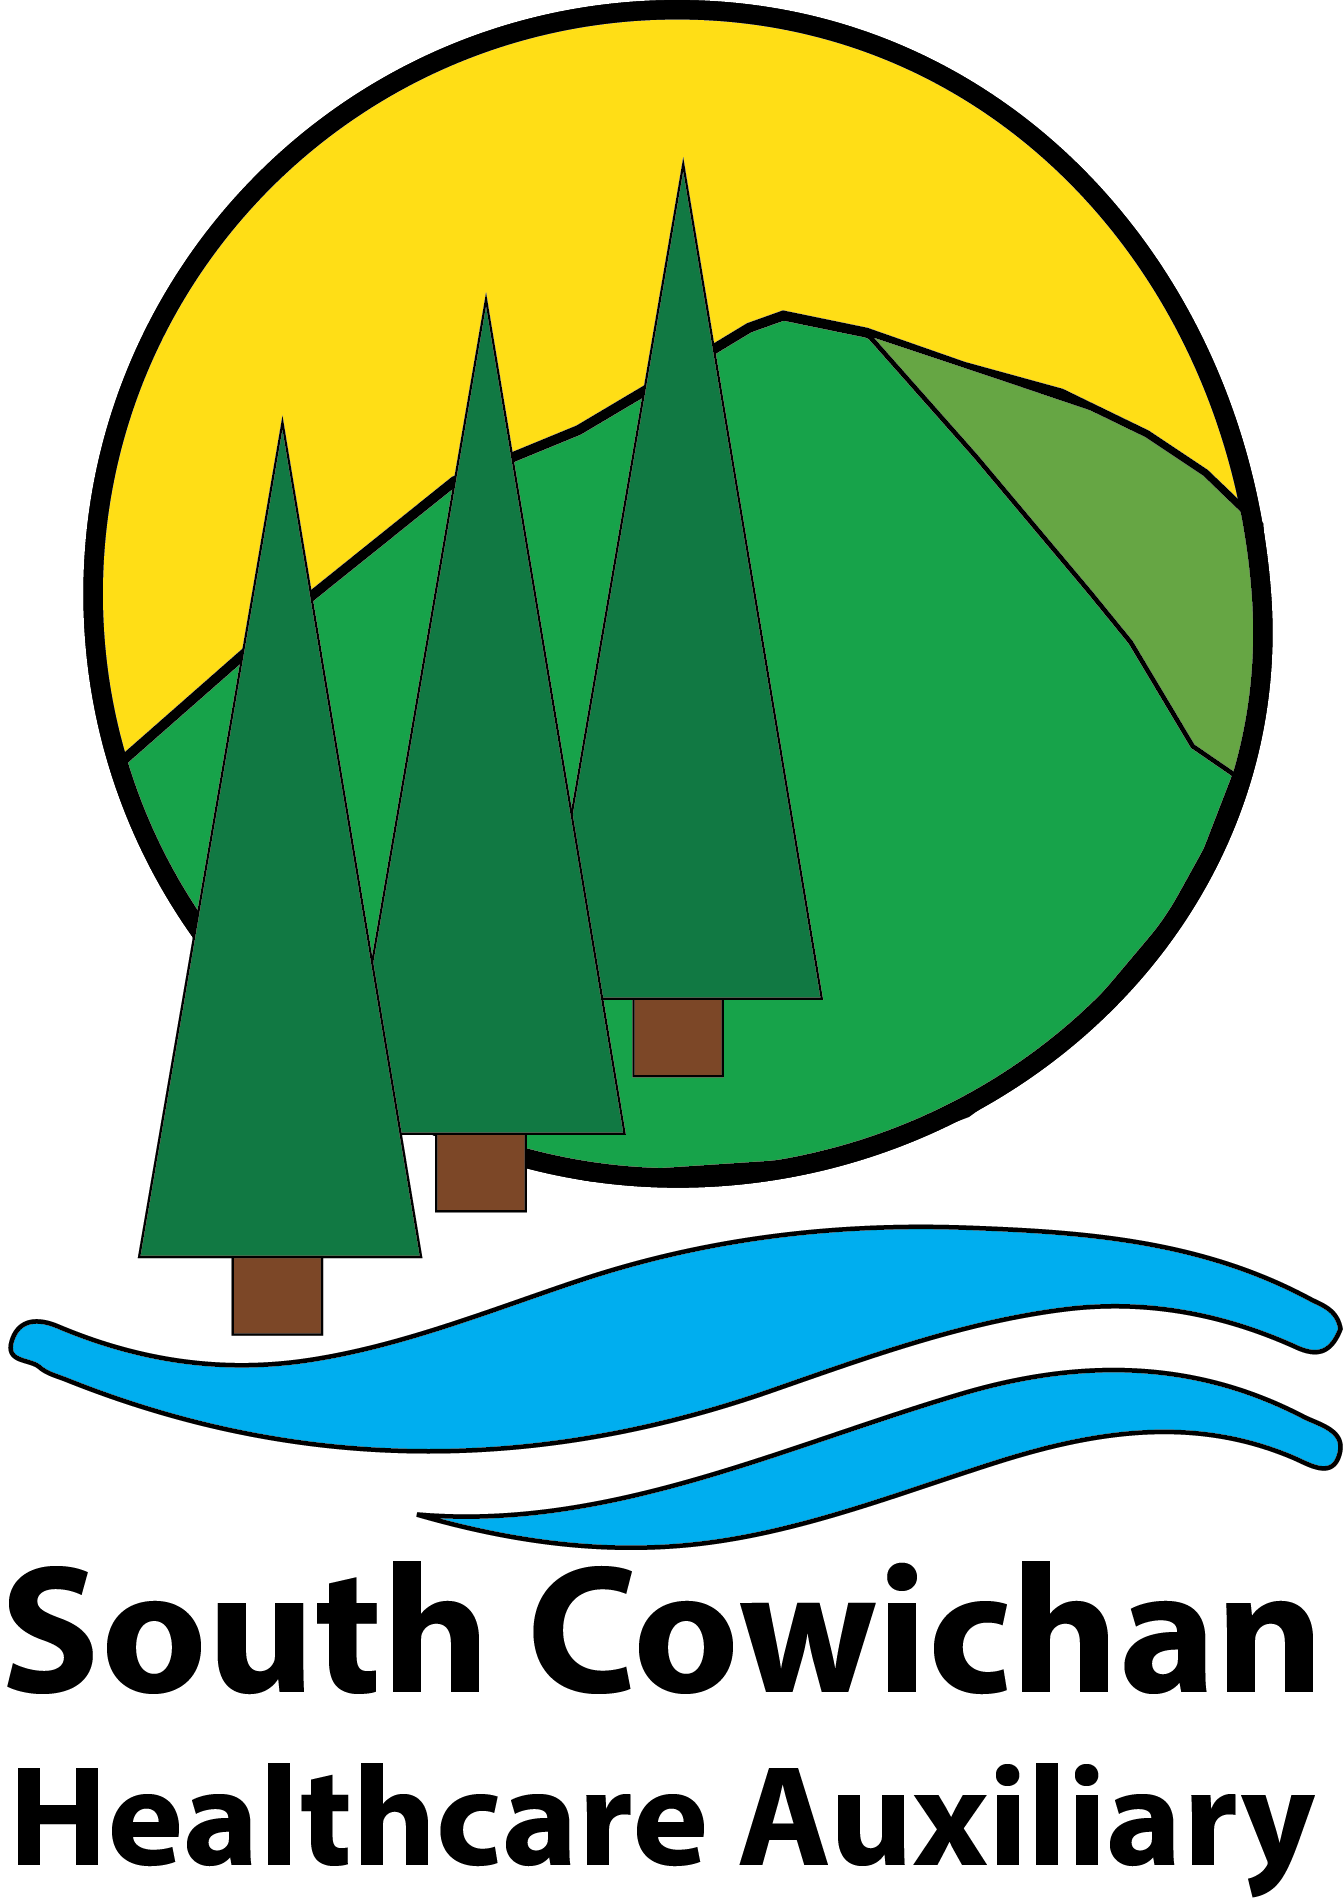 South Cowichan Healthcare Auxiliary